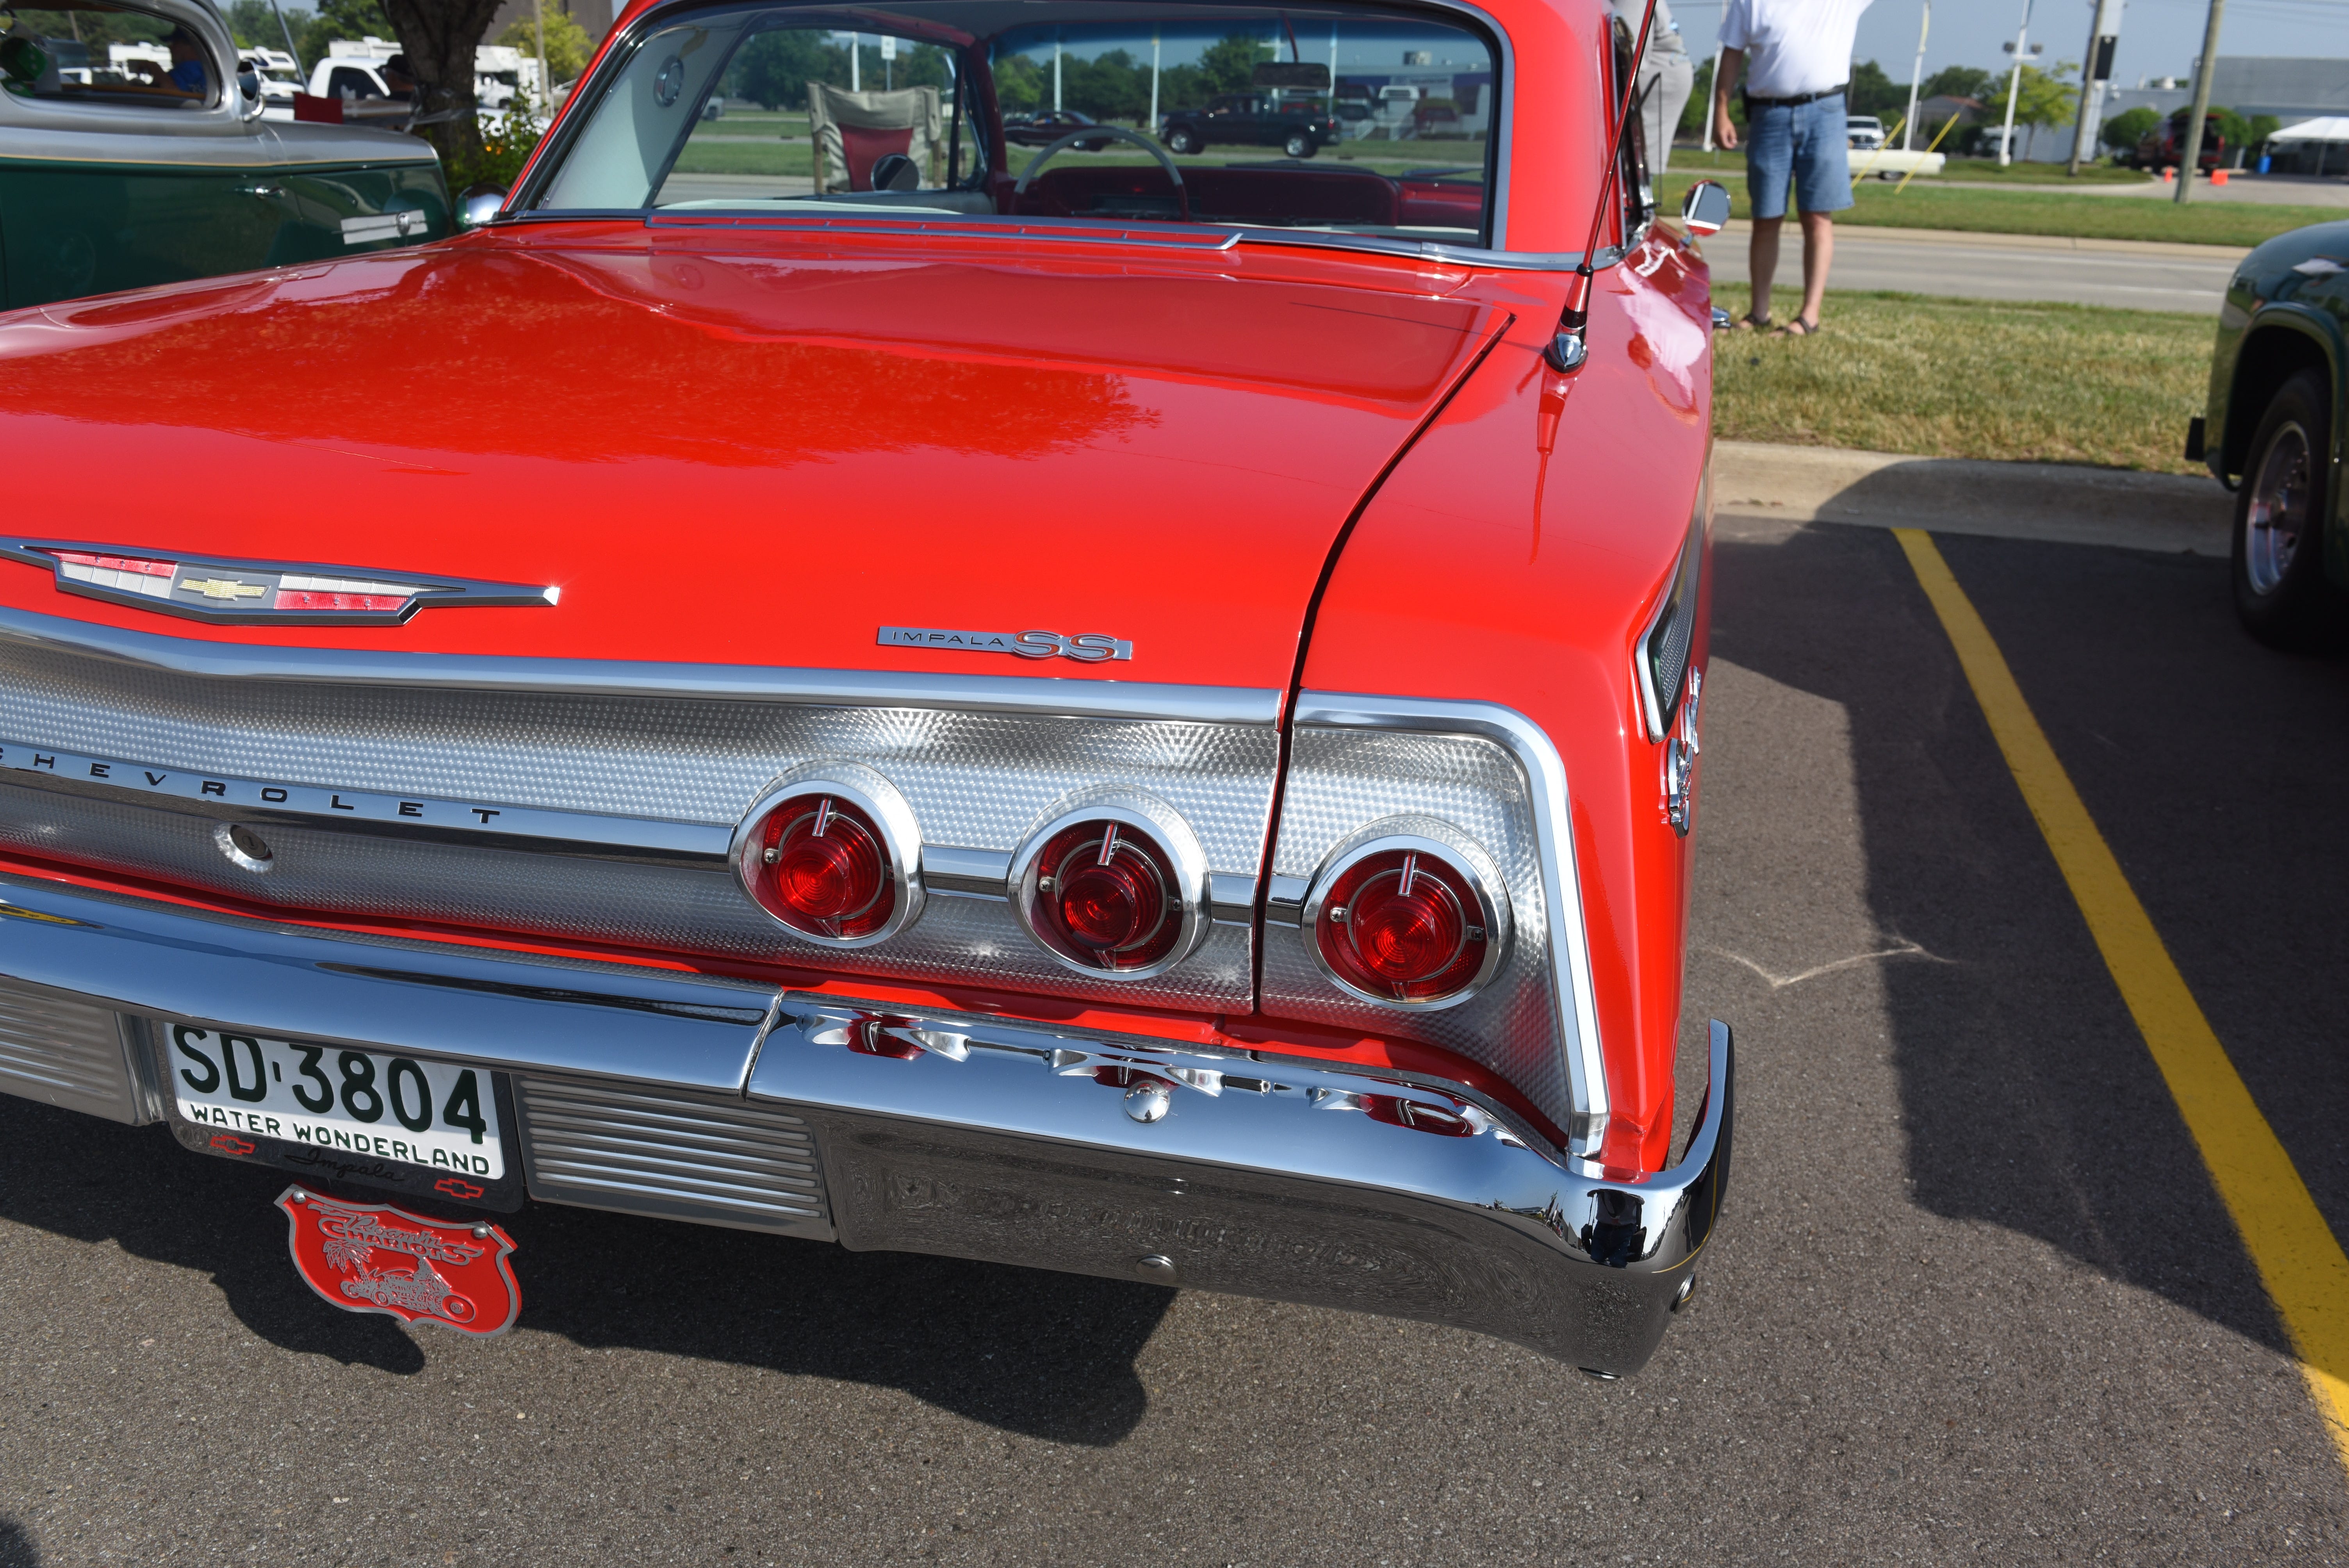 The 1962 Impala SS belonging to Lee Brown of Trenton was a crowd favorite along Fort Street for the Downriver Dream Cruise in Southgate on Saturday, June 30, 2018.